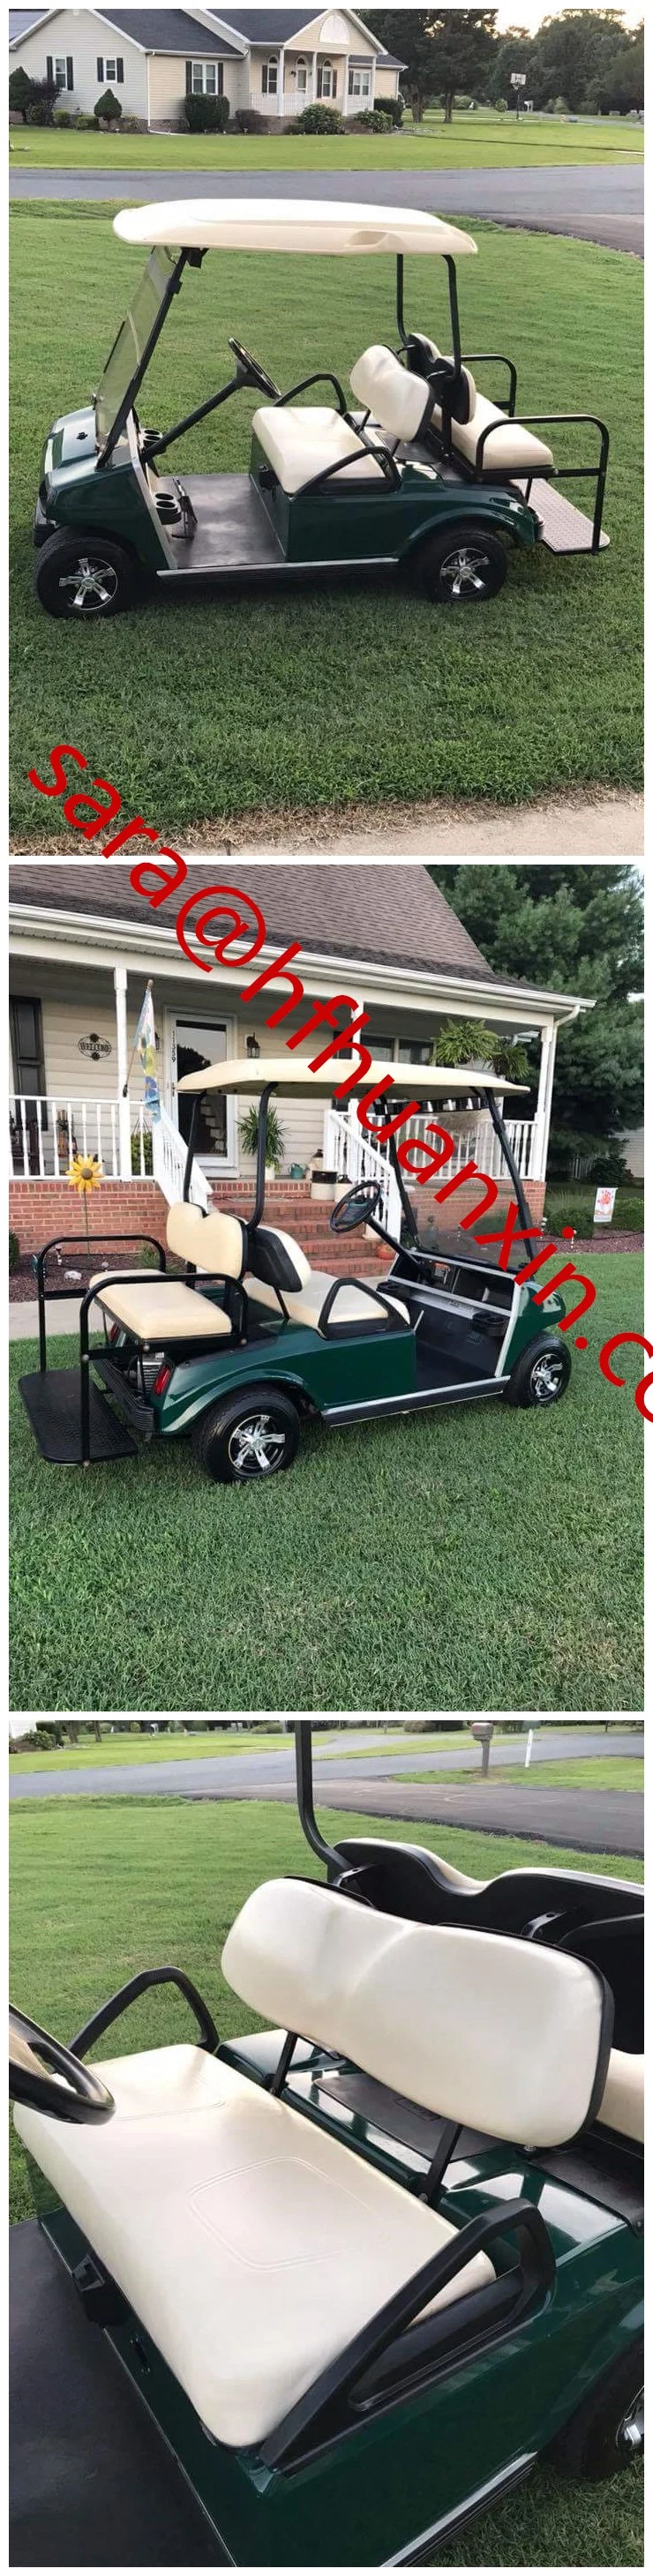 New Designed Fold Seats Electric Golf Cart A2+2 for 4 People